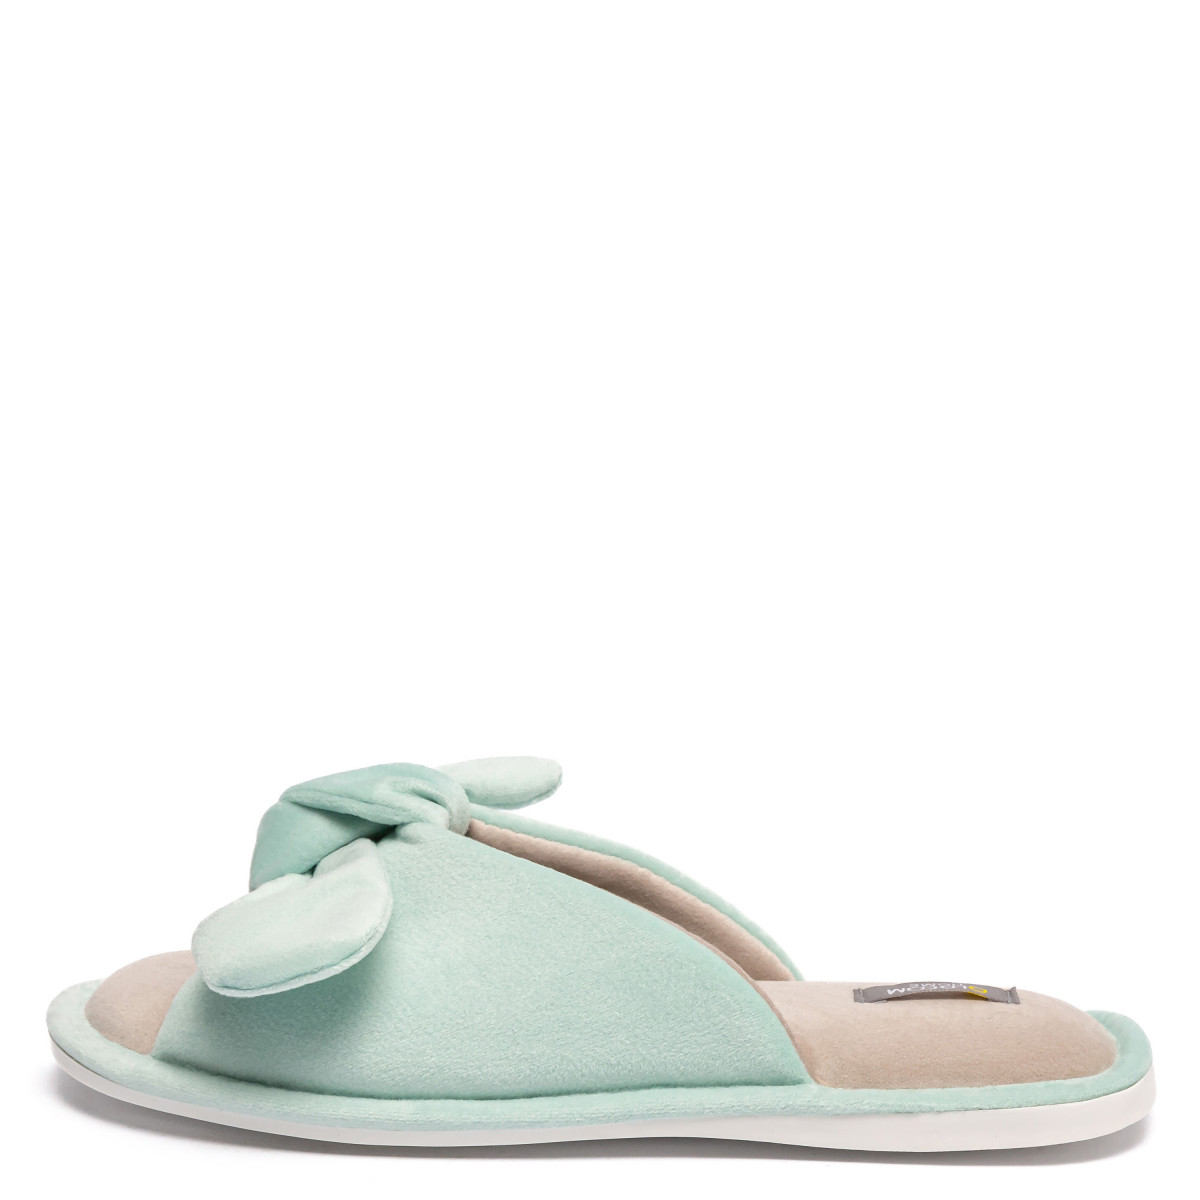 Home slippers BUNNY, Mint/Beige